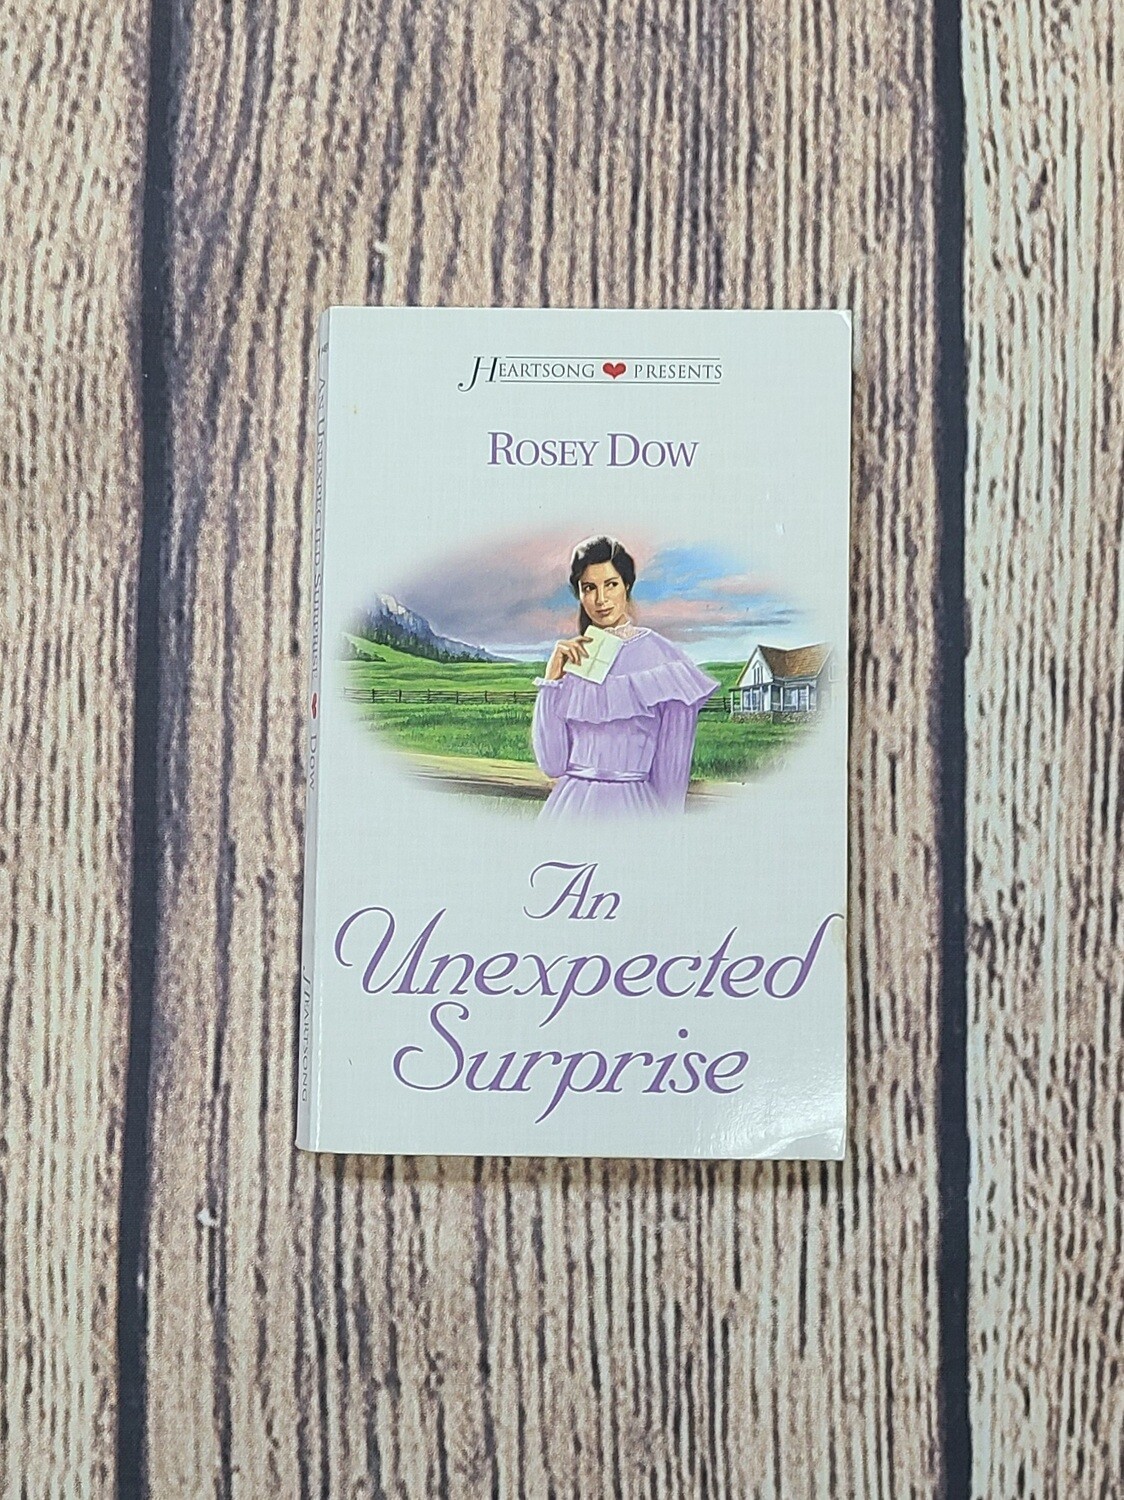 An Unexpected Surprise by Rosey Dow